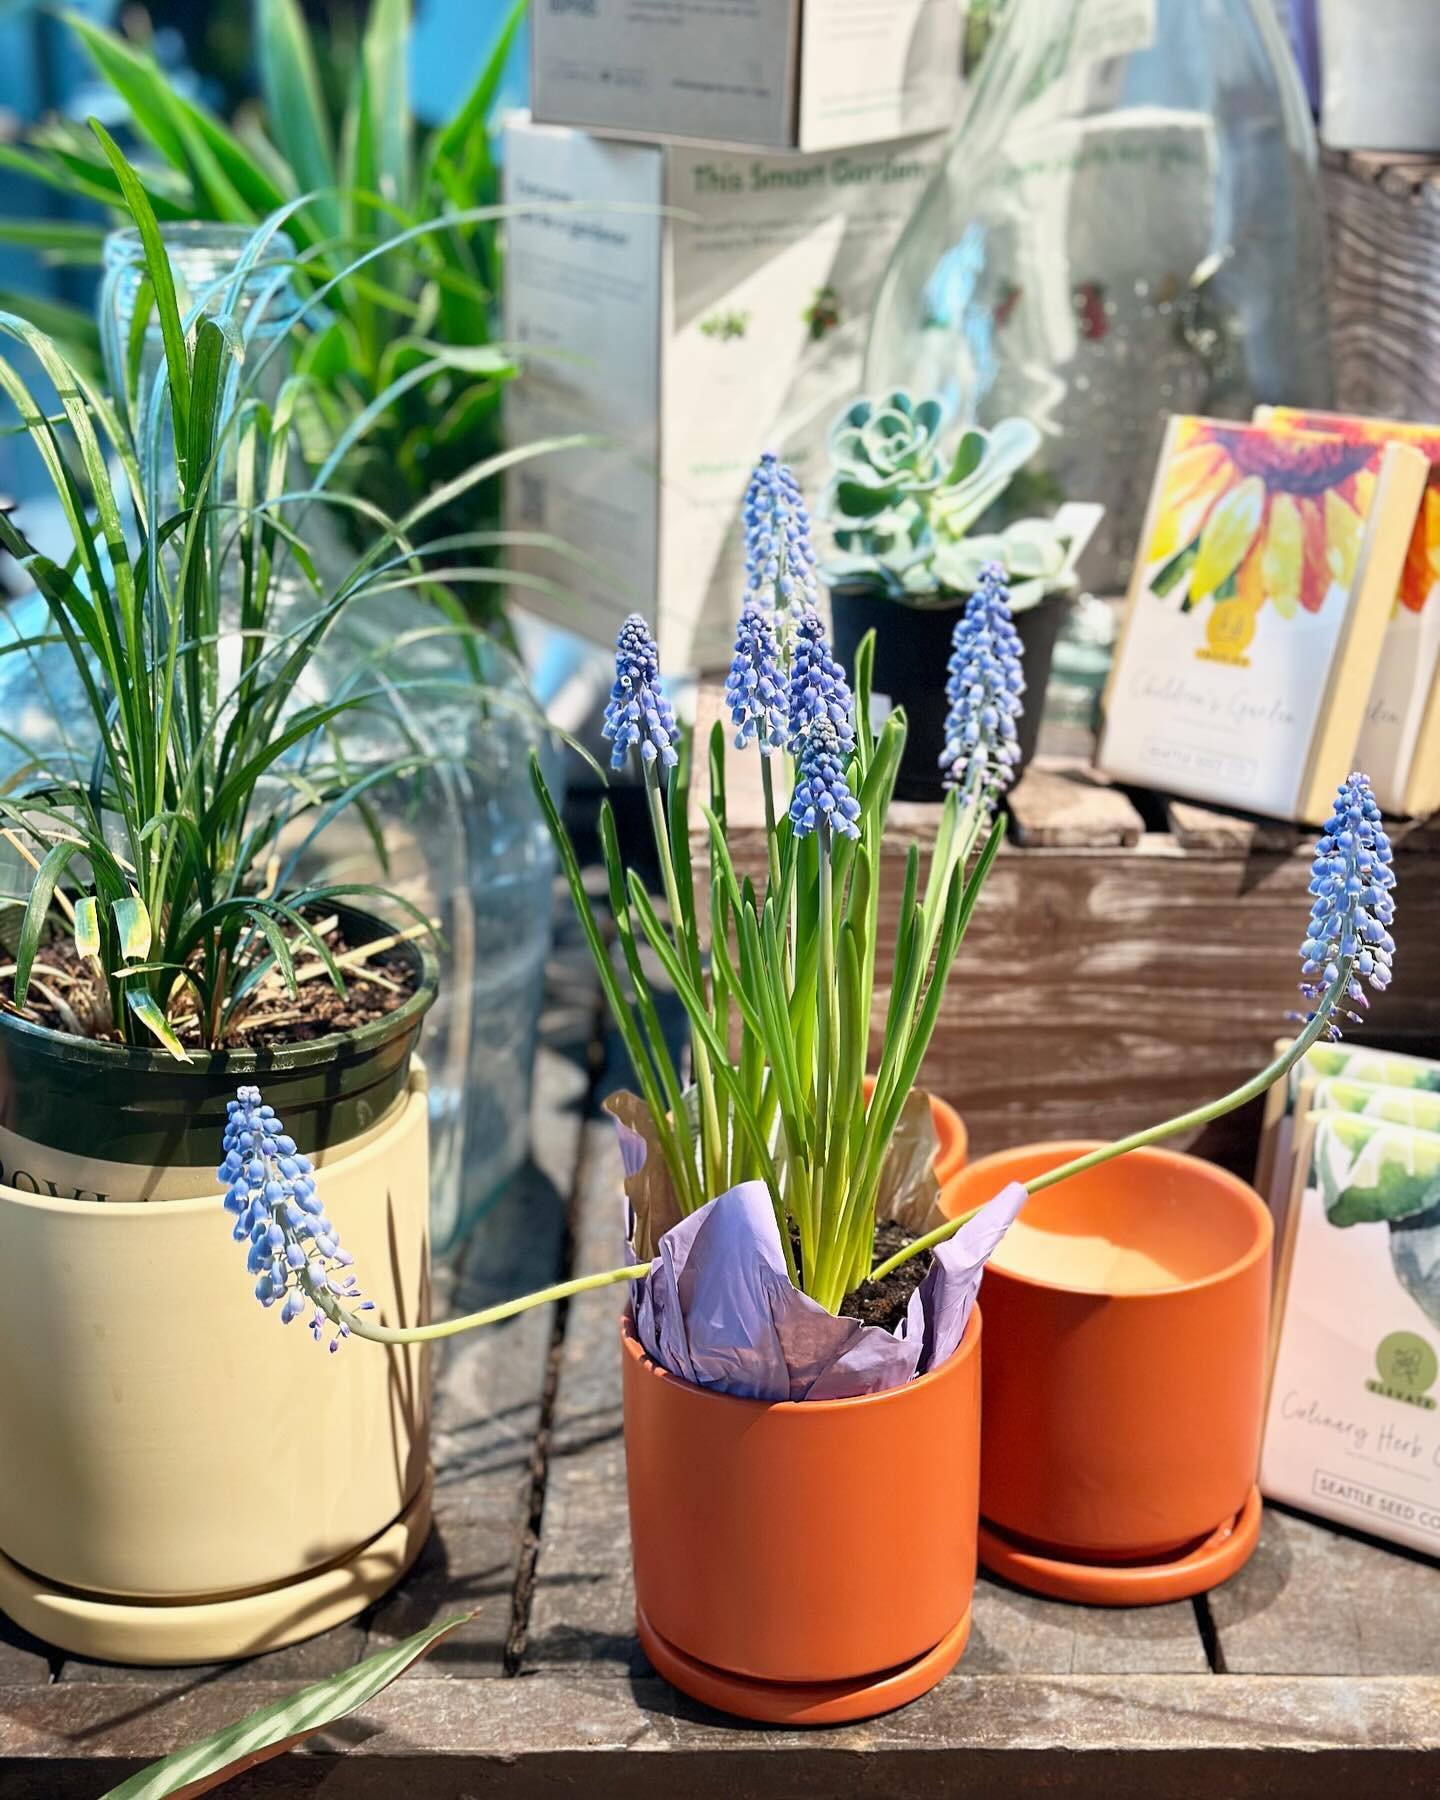 🌷 We're full of LIFE in here! We welcomed a new batch of house plants and hanging baskets to the store from Schaefer's Gardens! And of course, @penchant4petals famous tulips.